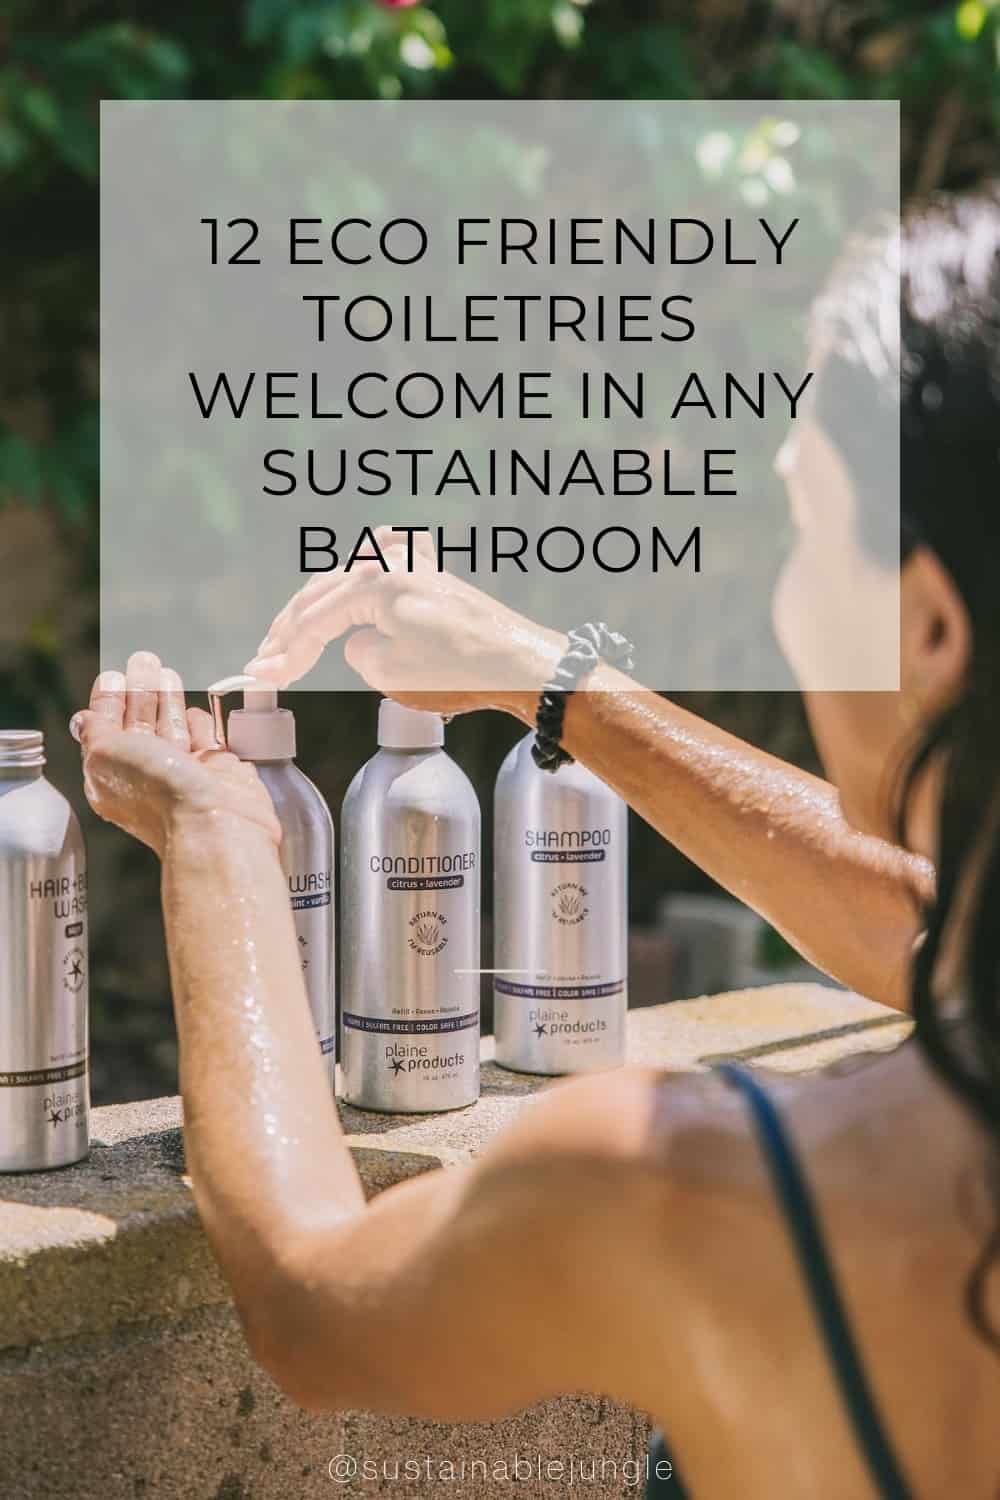 12 Eco Friendly Toiletries Welcome In Any Sustainable Bathroom #ecofriendlytoiletries #mensecofriendlytoiletries #womensecofriendlytoiletries #bestecofriendlytoiletries #ecofriendlytoiletryproducts #sustainabletoiletries #sustainablejungle Image by Plaine Products